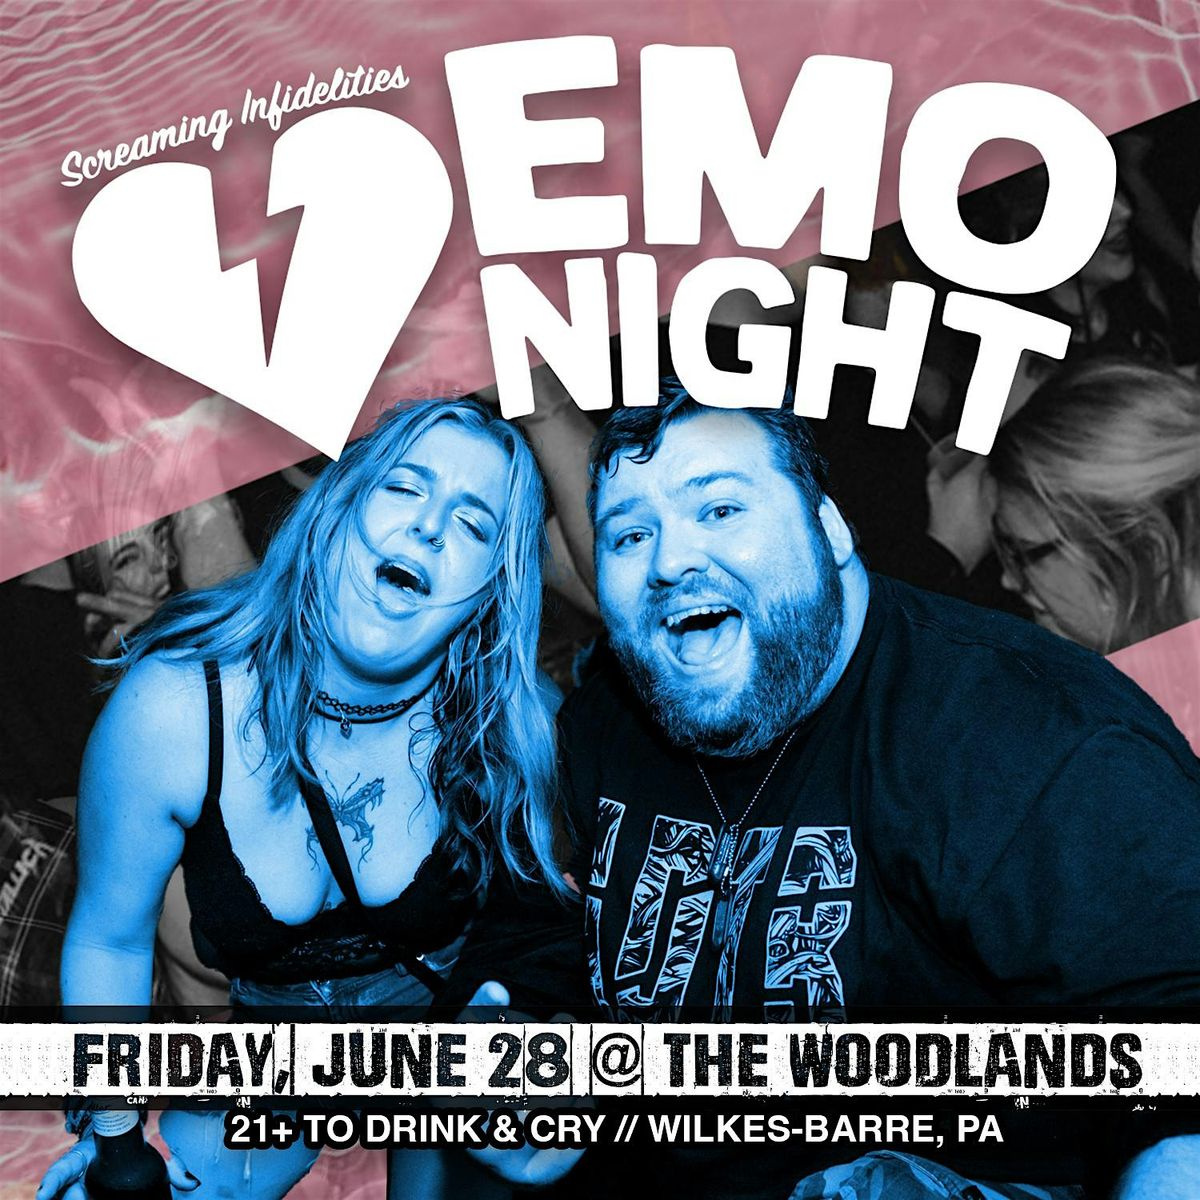 Emo Night at The Woodlands